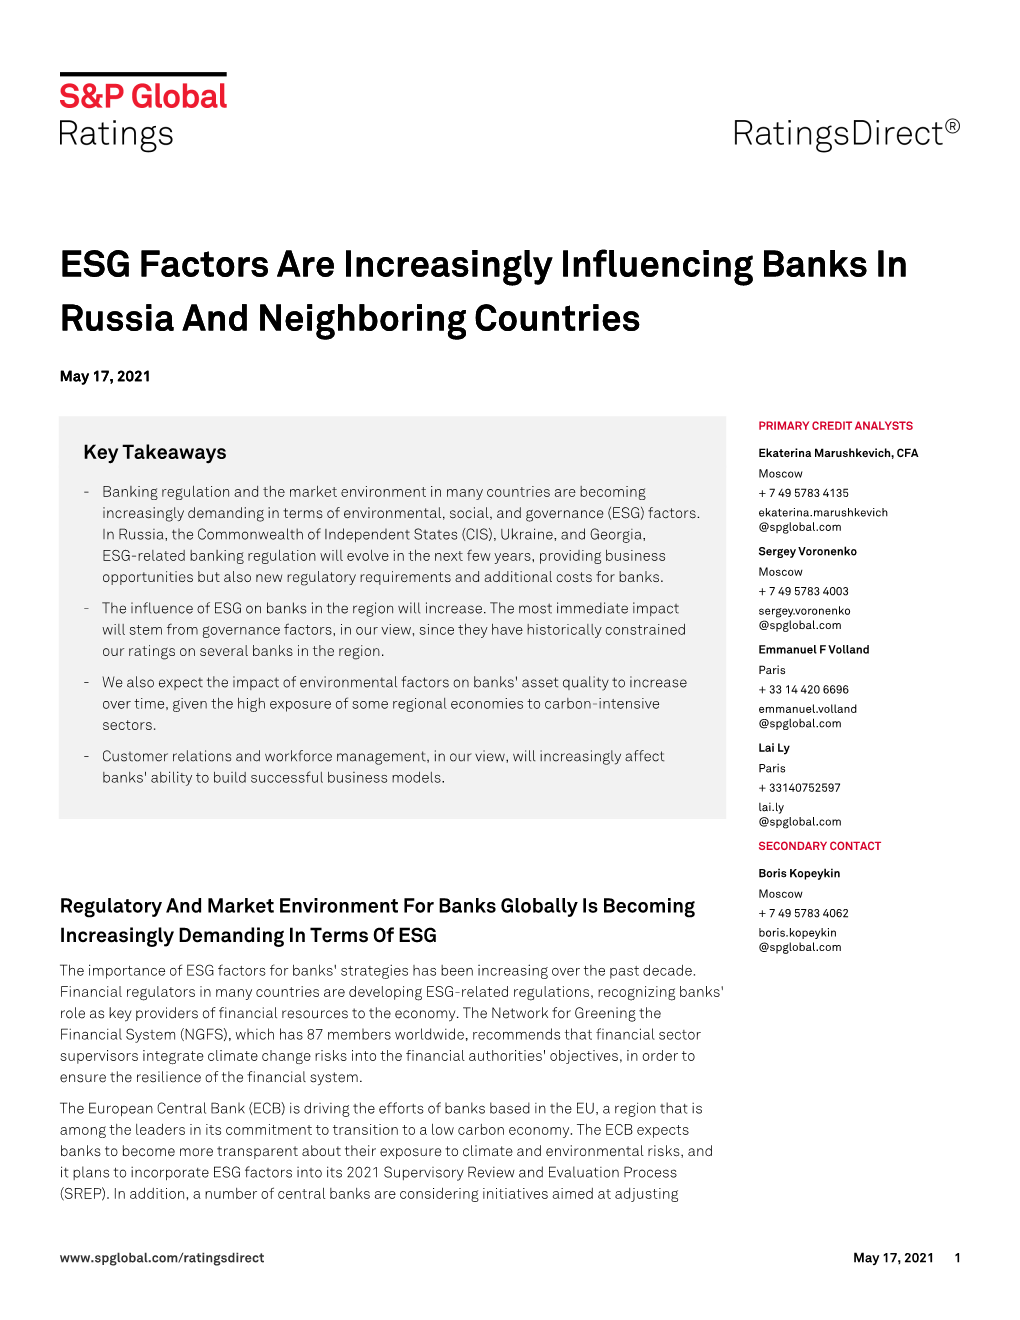 ESG Factors Are Increasingly Influencing Banks in Russia and Neighboring Countries ESG Factors Are Increasingly Influencing Bank